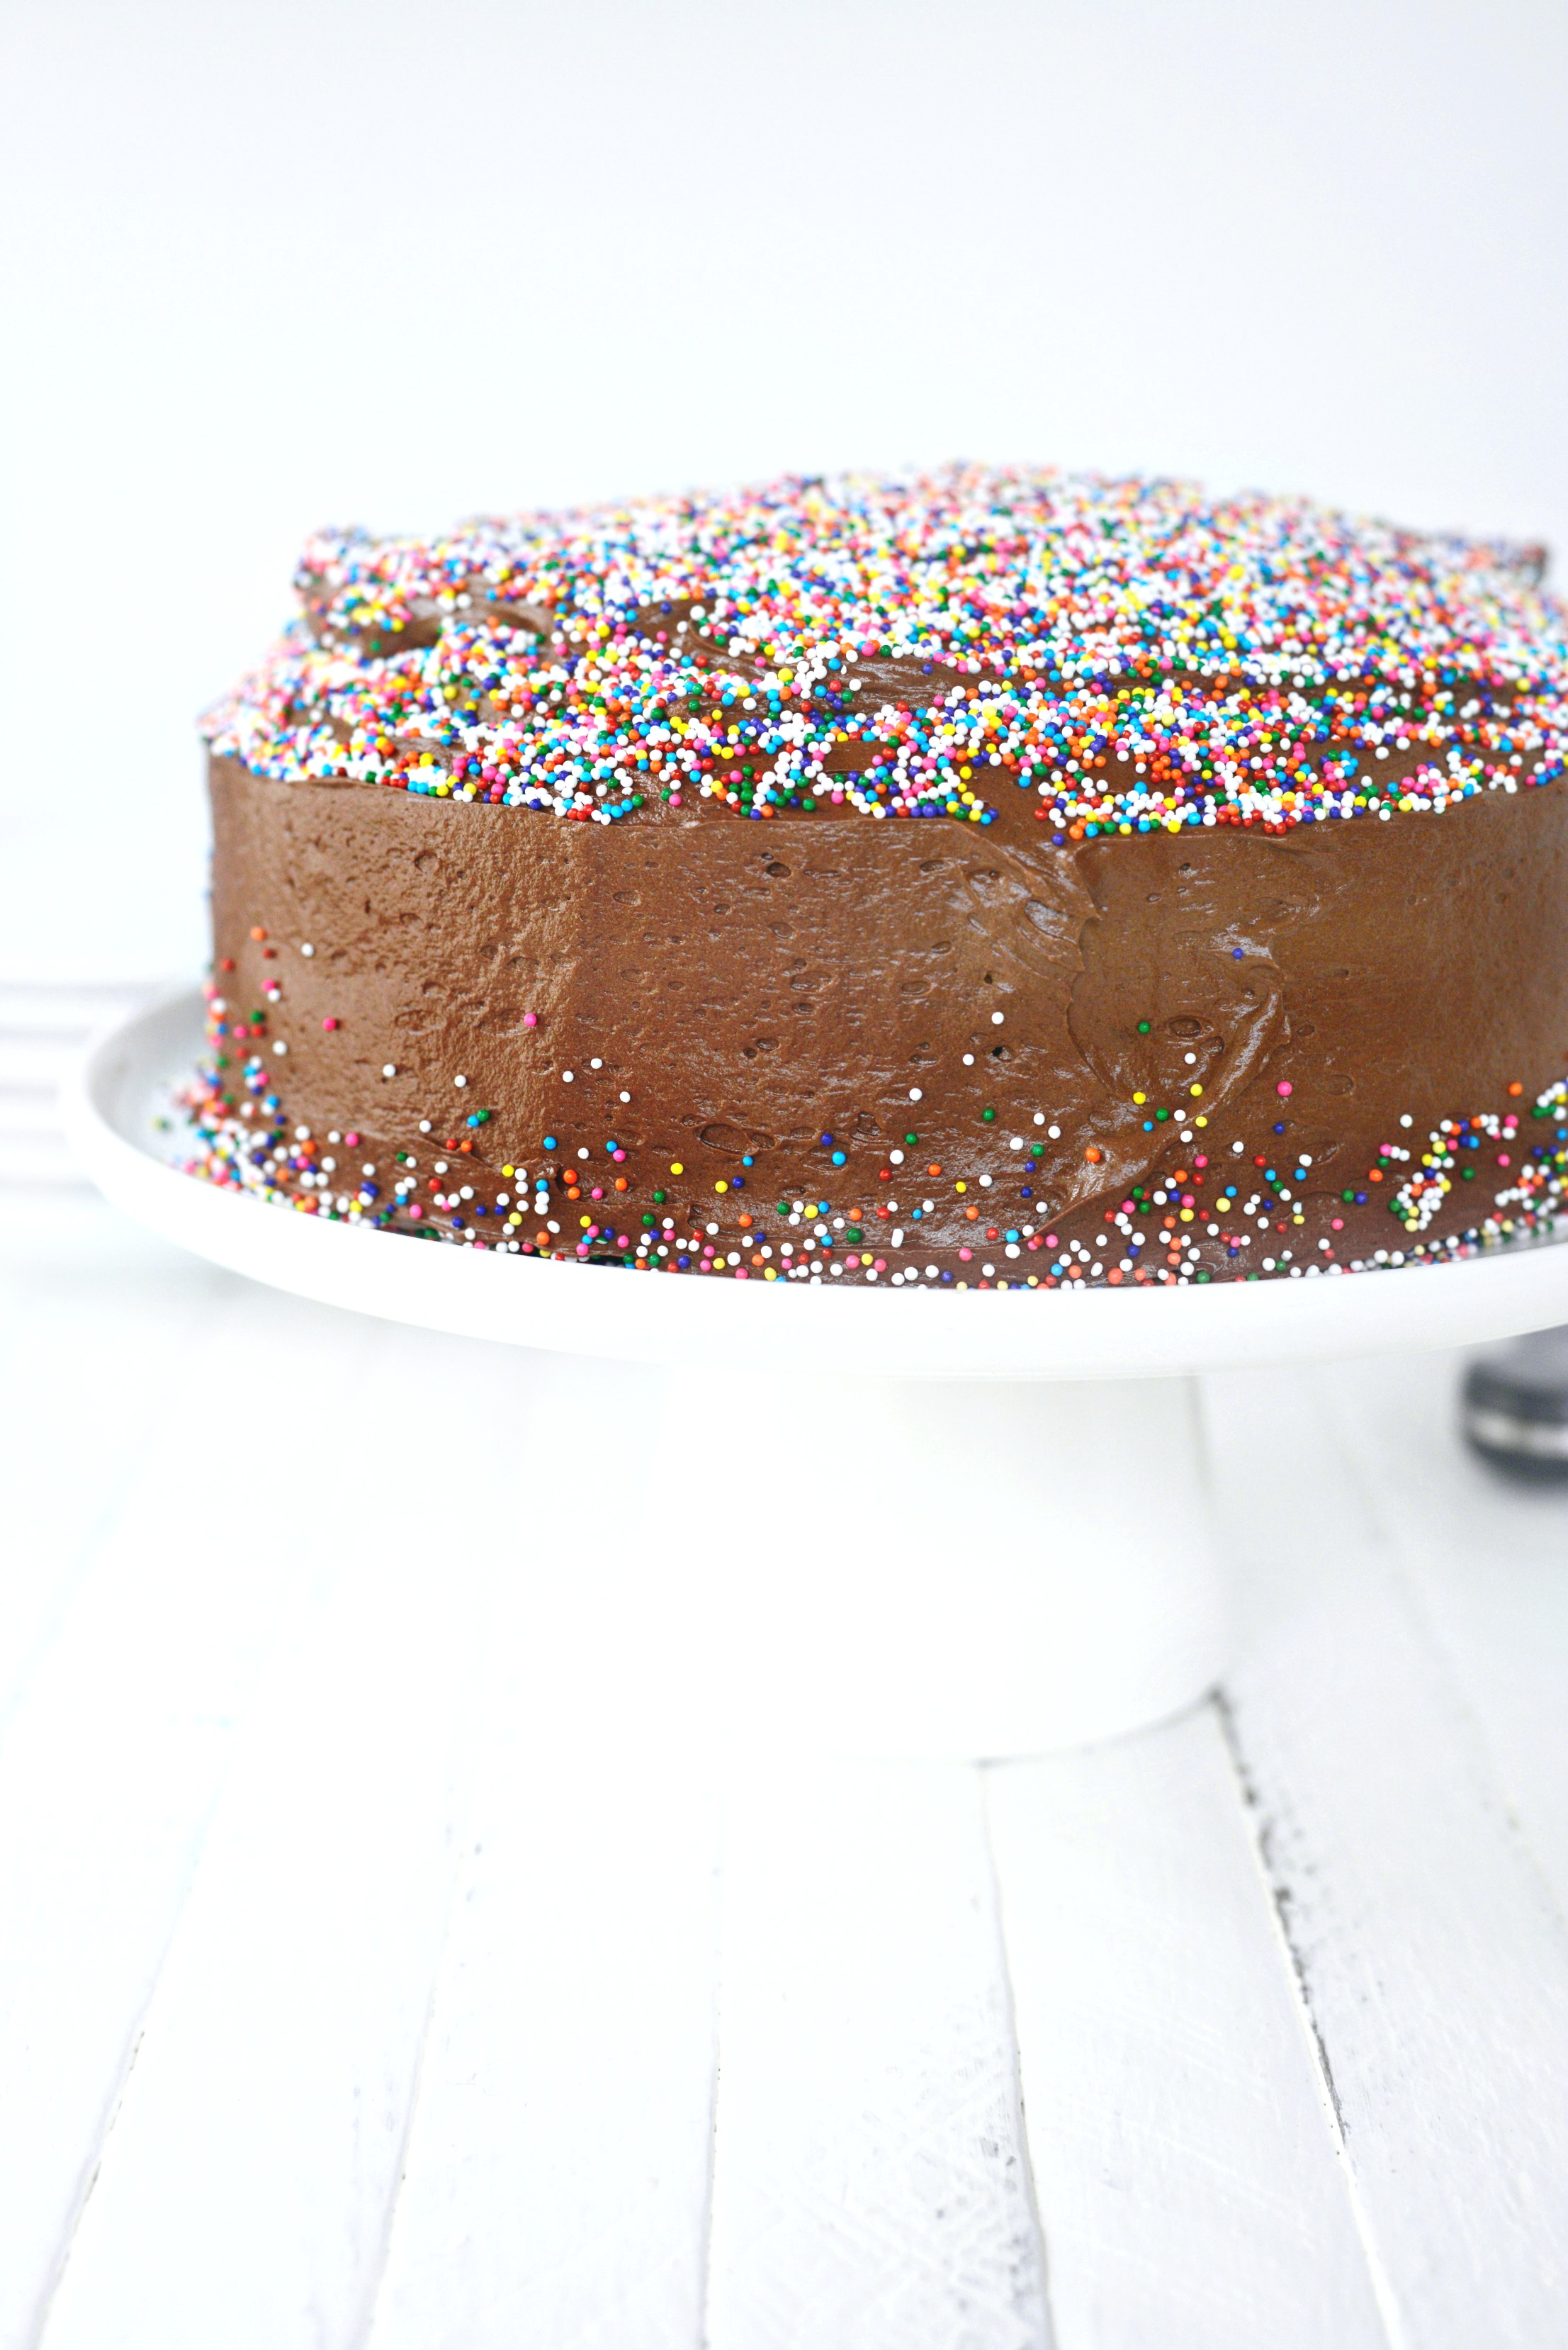 Easy Chocolate Cake Recipe with Fluffy Chocolate Buttercream Frosting